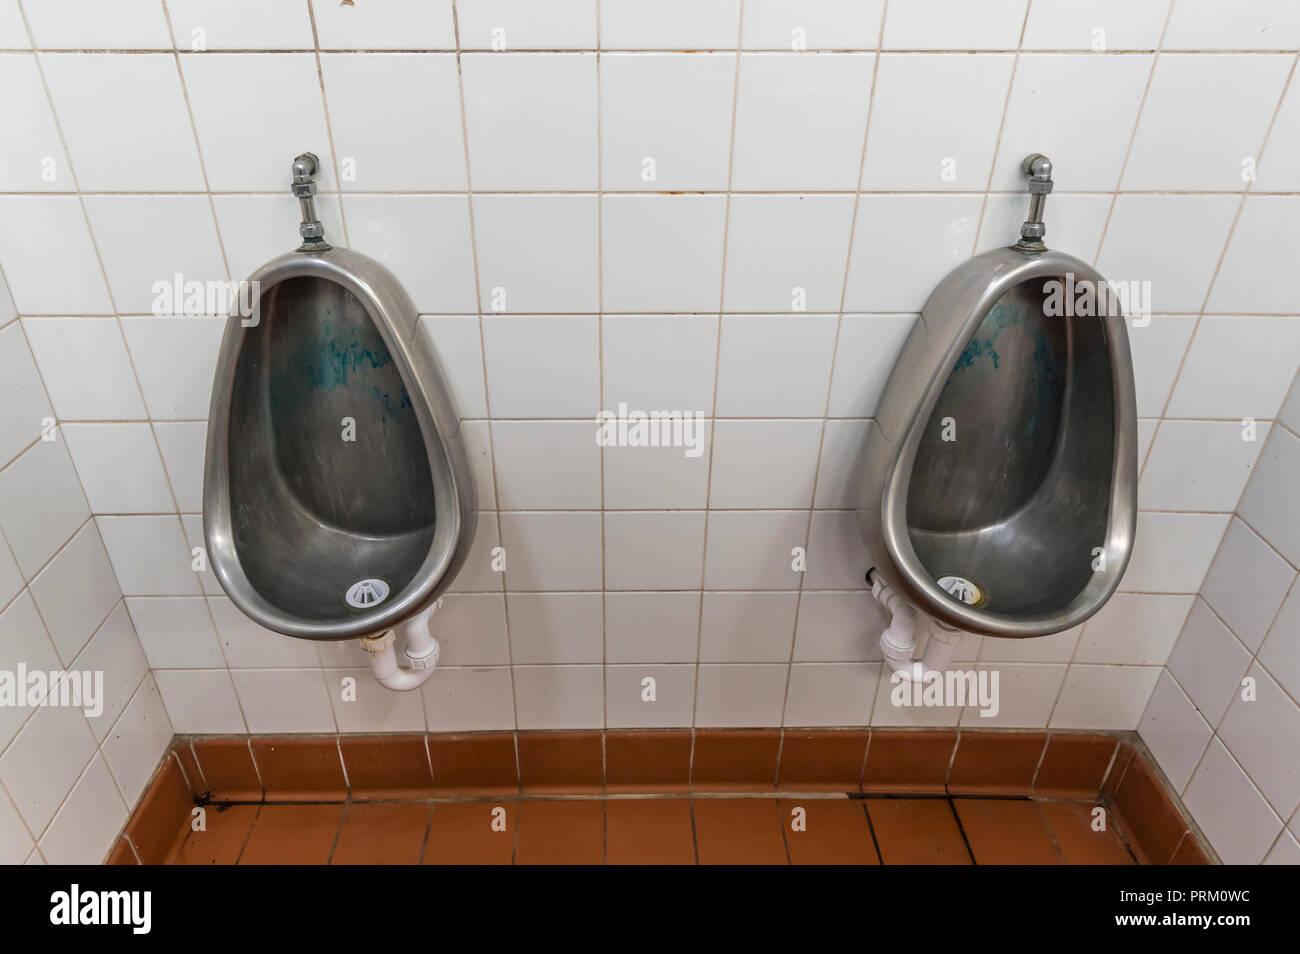 Pair of urinals in a gents public toilet in England, UK. Stock Photo